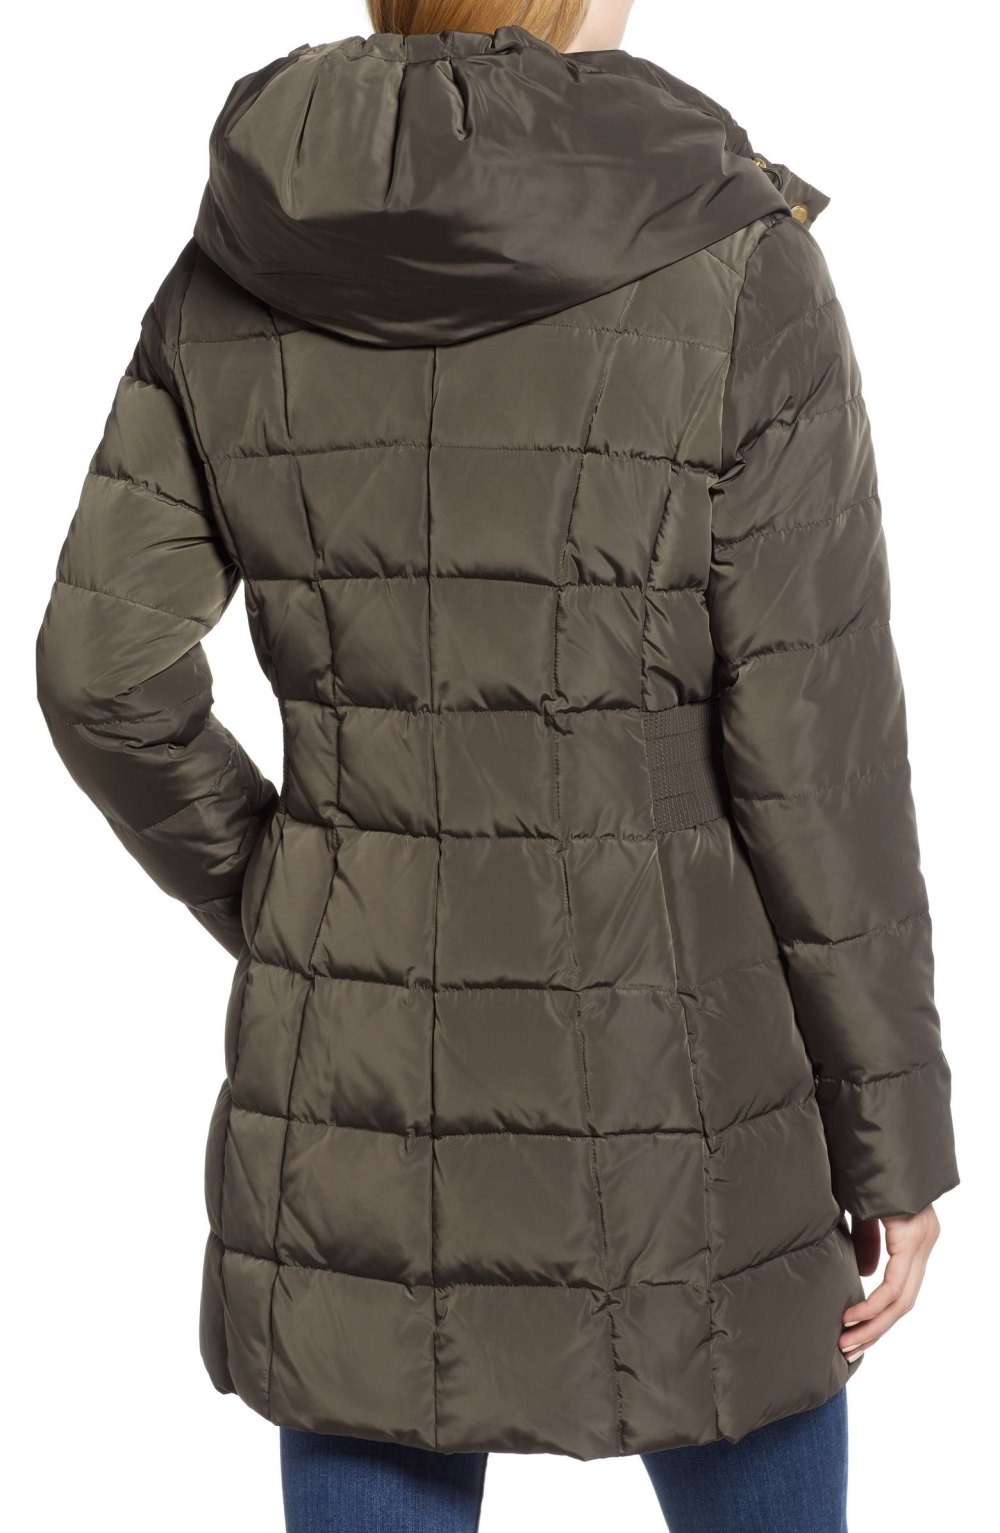 Cole Haan Hooded Down & Feather Jacket